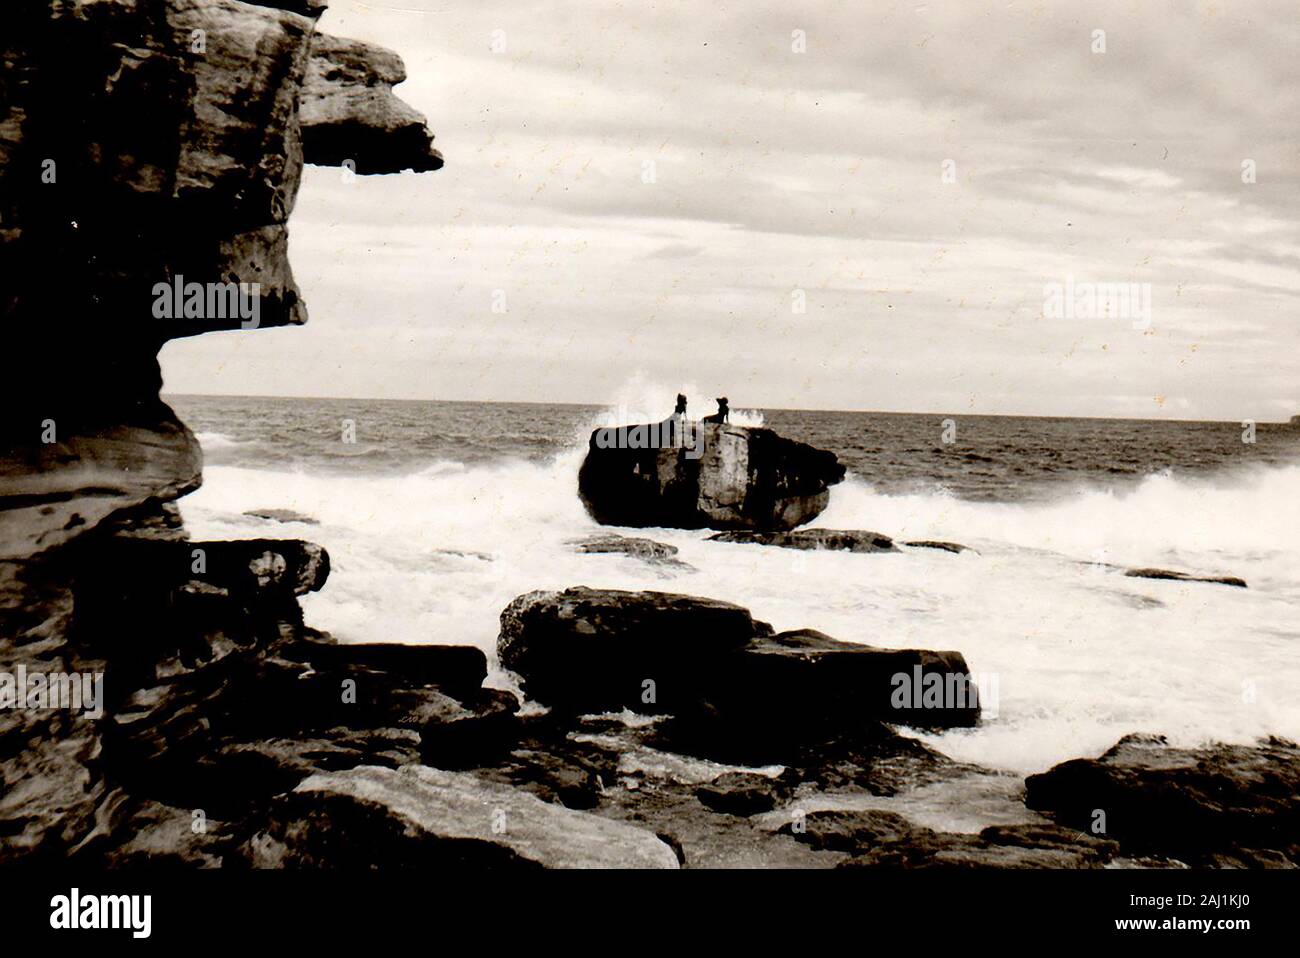 July 1971 - Mermaid rock, Bondi Beach, Australia,(when the mermaids were still intact). The rock (235 tons) itself was allegedly washed ashore during a storm on 15th July 1912. The mermaids were created by sculptor Lyall Randolph (installed 3 April 1960) were modelled on two local women  Jan Carmody, (Miss Australia Surf 1959) and Lynette Whillier, (champion swimmer and runner-up in the same contest.). Lynette was lost to the sea in 1974, the other with one arm missing was removed in 1976 and is preserved in Waverley library. Both were made from bronze coloured fiberglass. Stock Photo